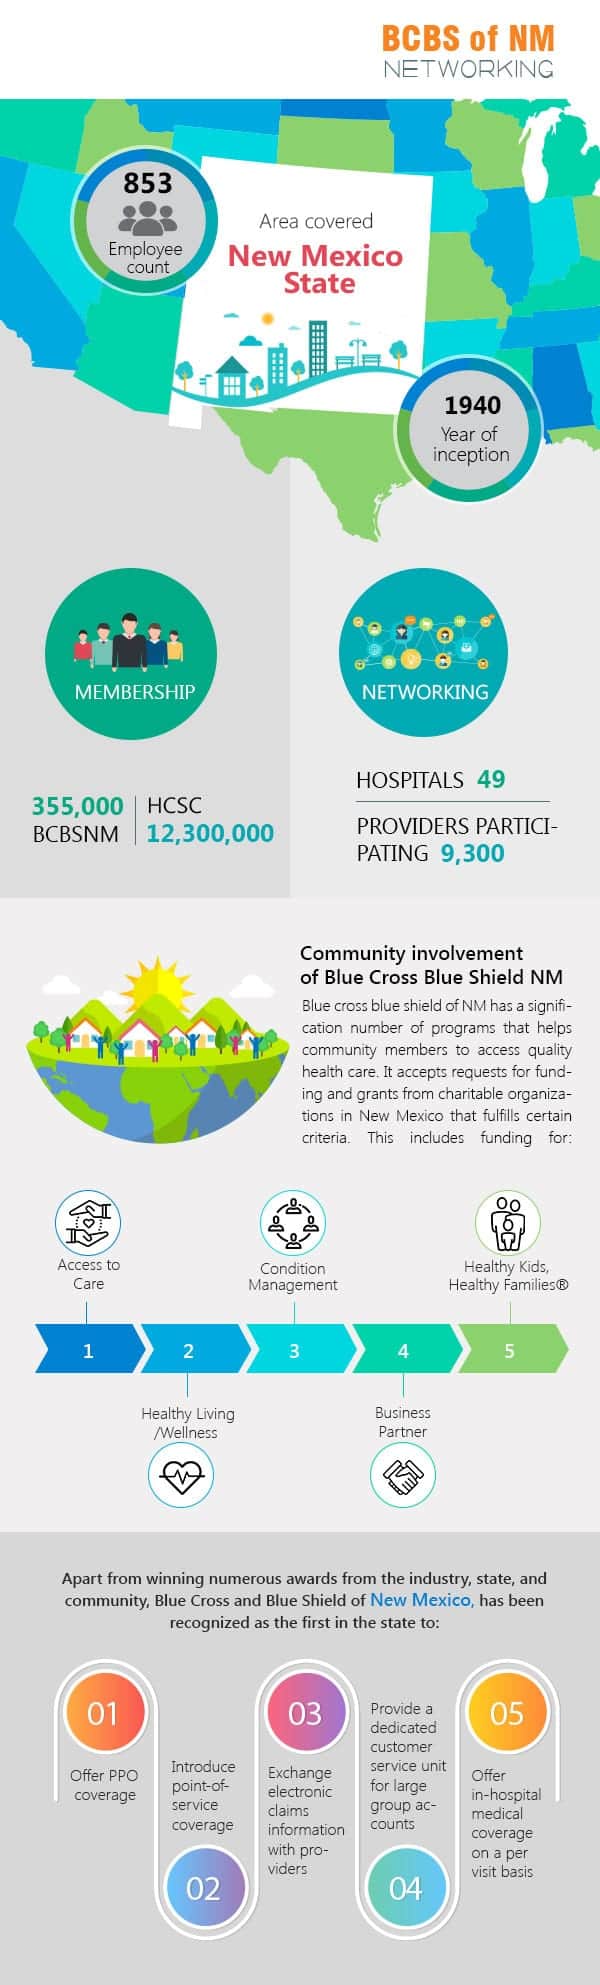 BCBS of NM: A comprehensive description of the Blue Cross Blue Shield on New Mexico- its inception, its function, etc…